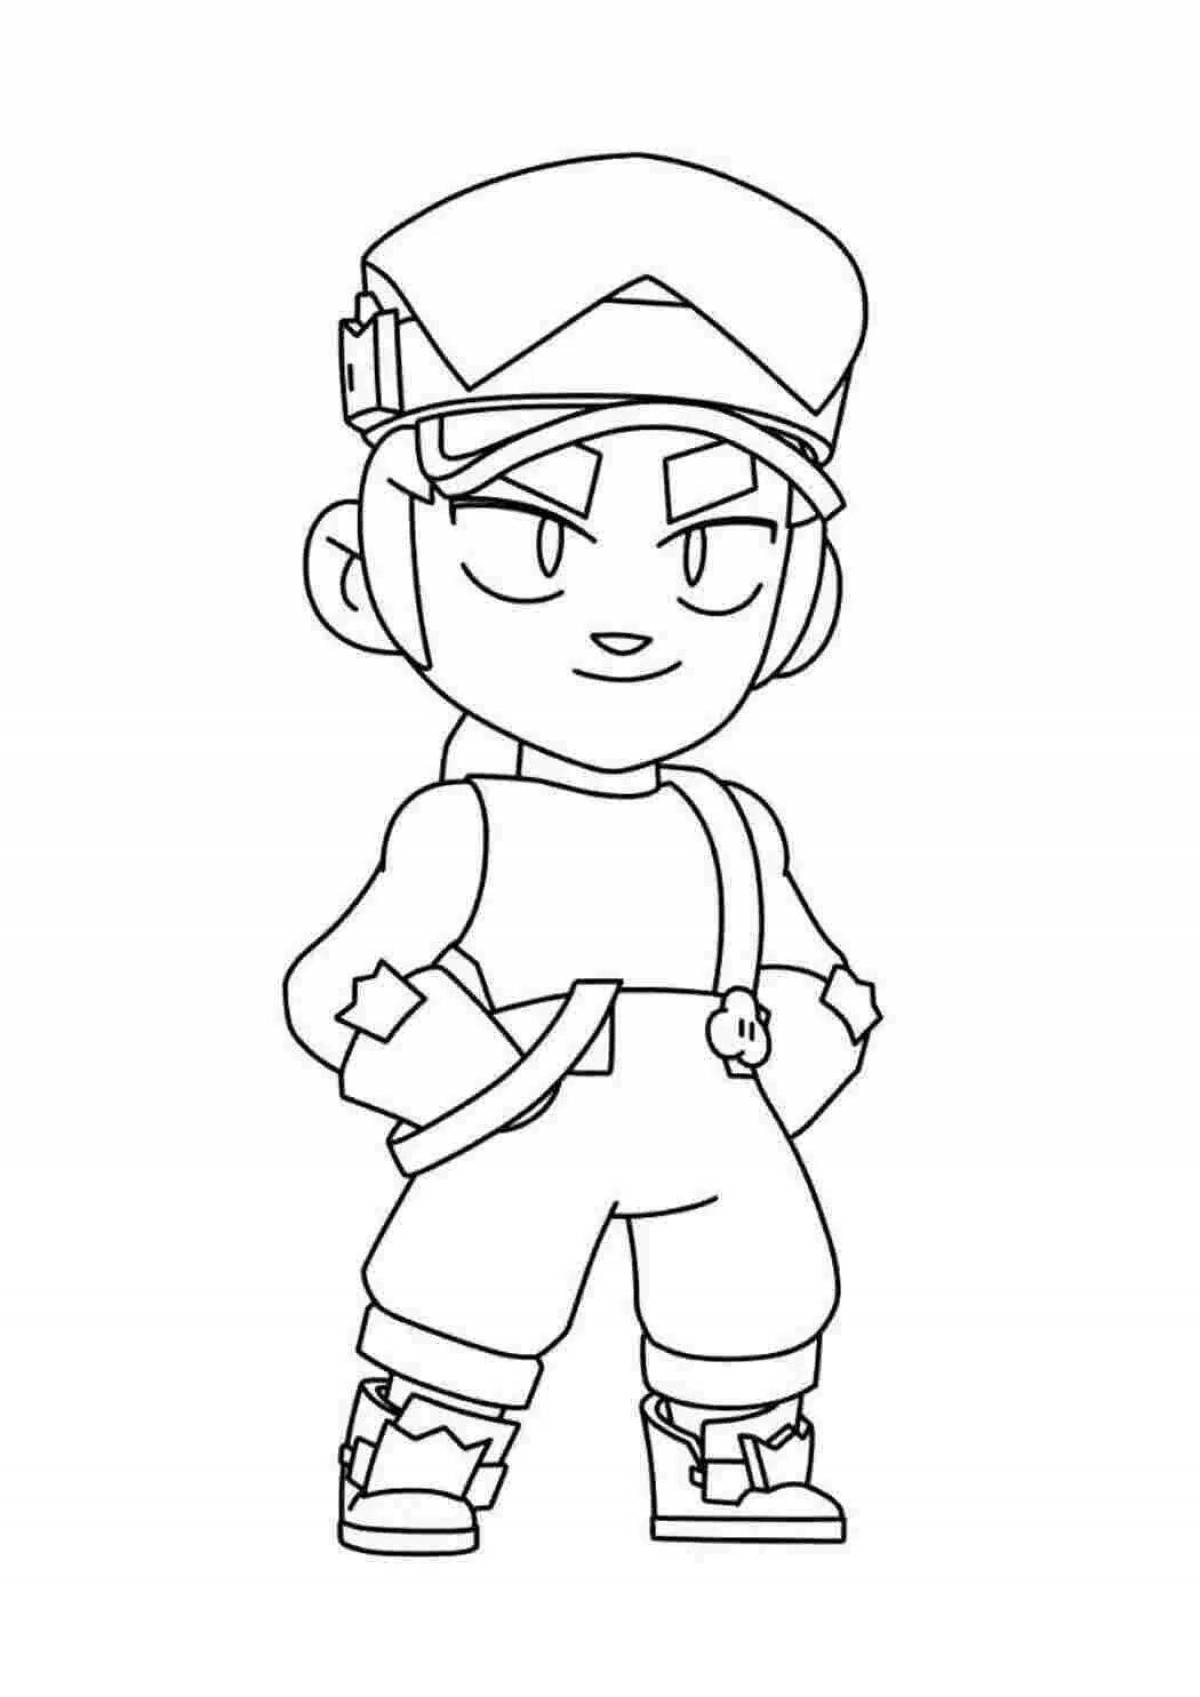 Colorful brawl stars coloring pages for boys